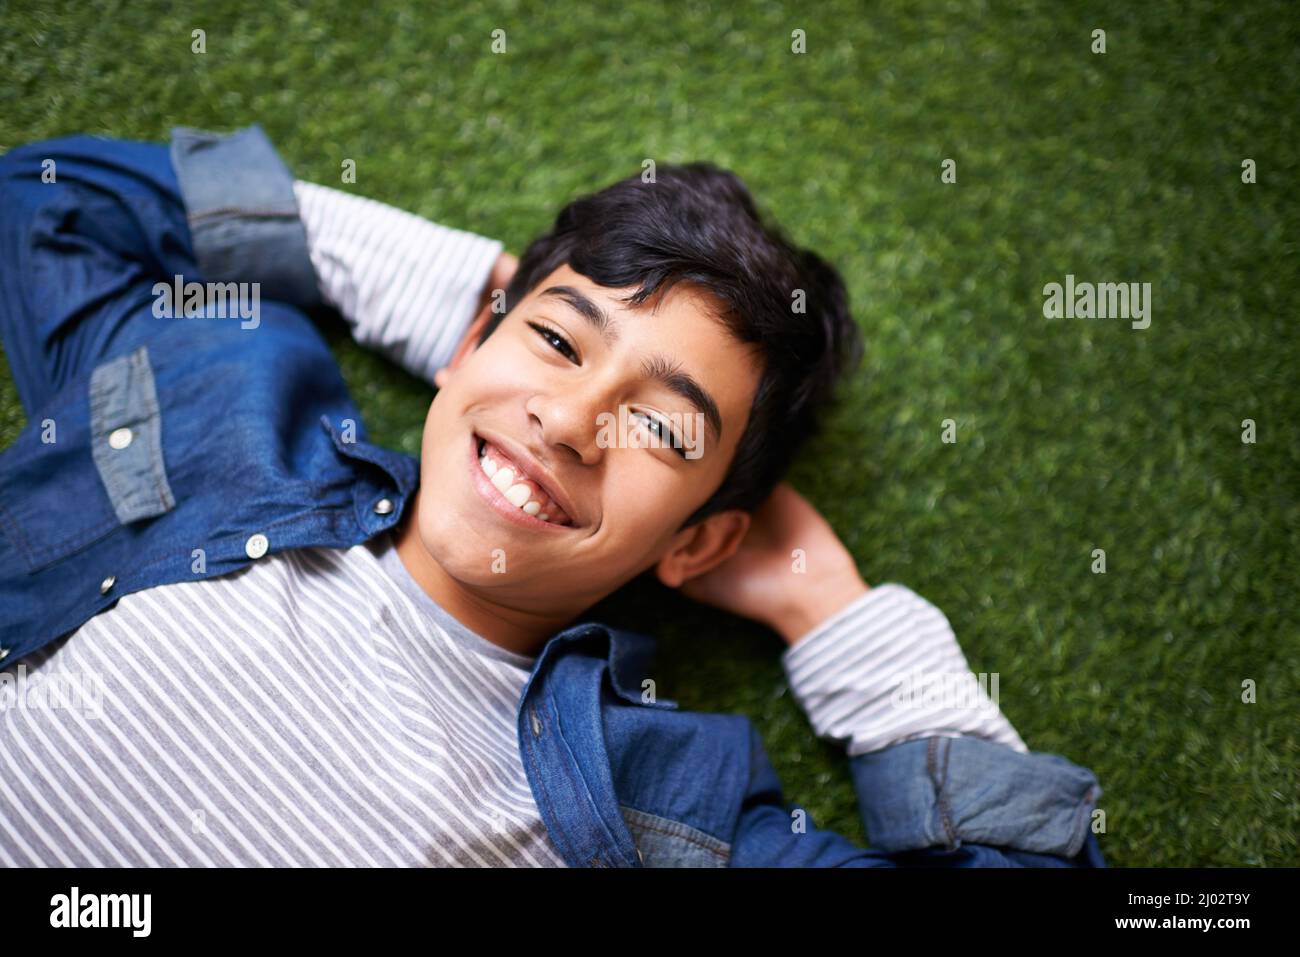 Its awesome being a kid. A young boy relaxing on the lawn. Stock Photo